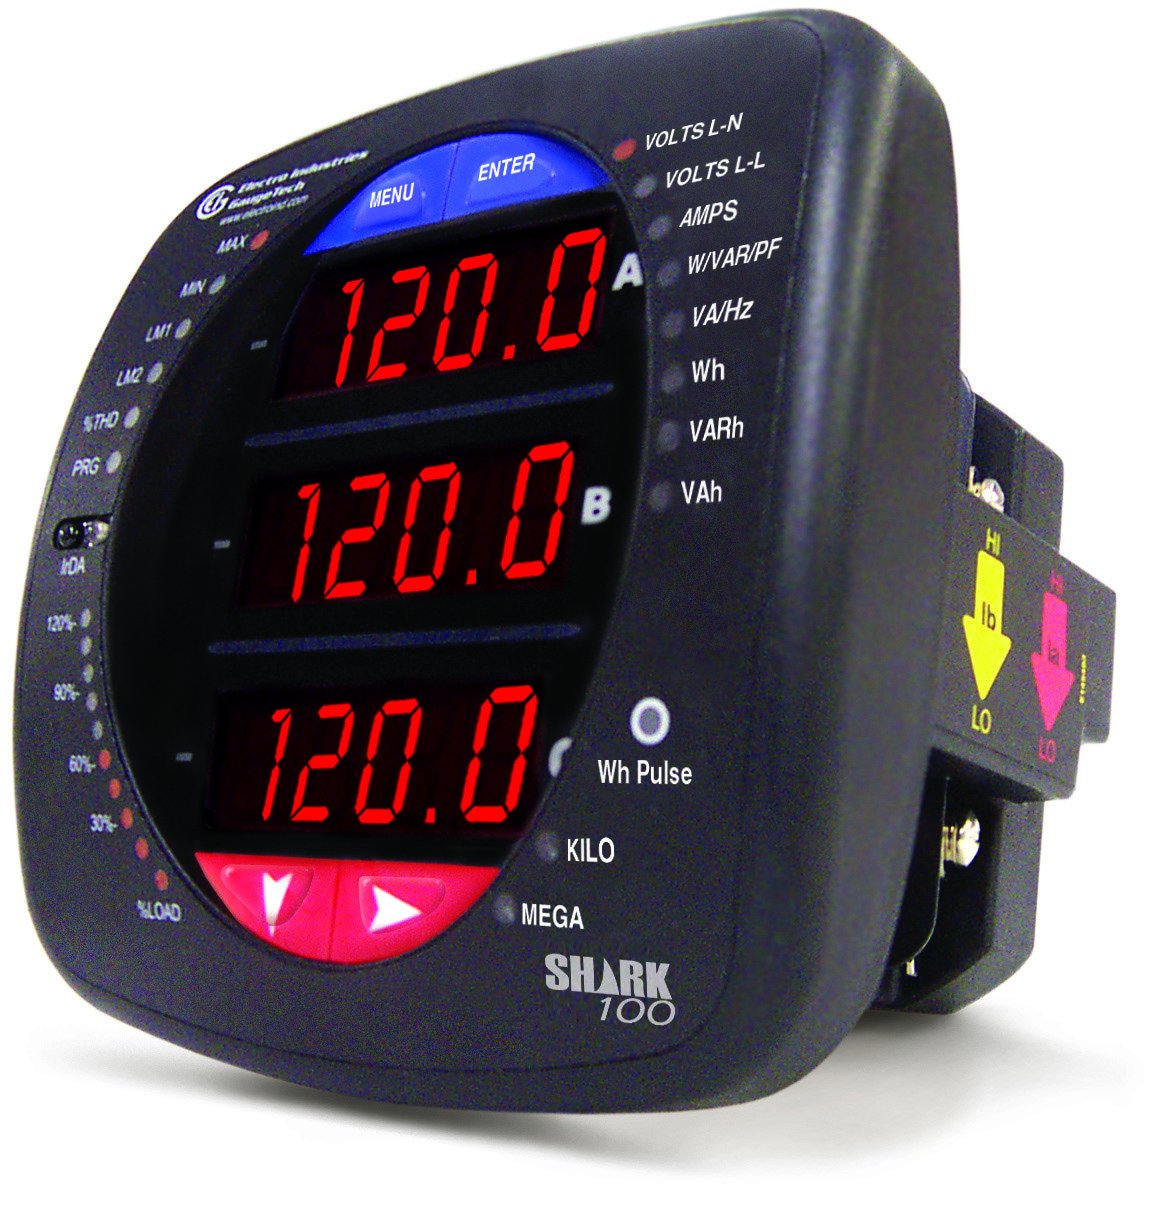 Shark 100 Economical Multi-function Power and Energy Meter